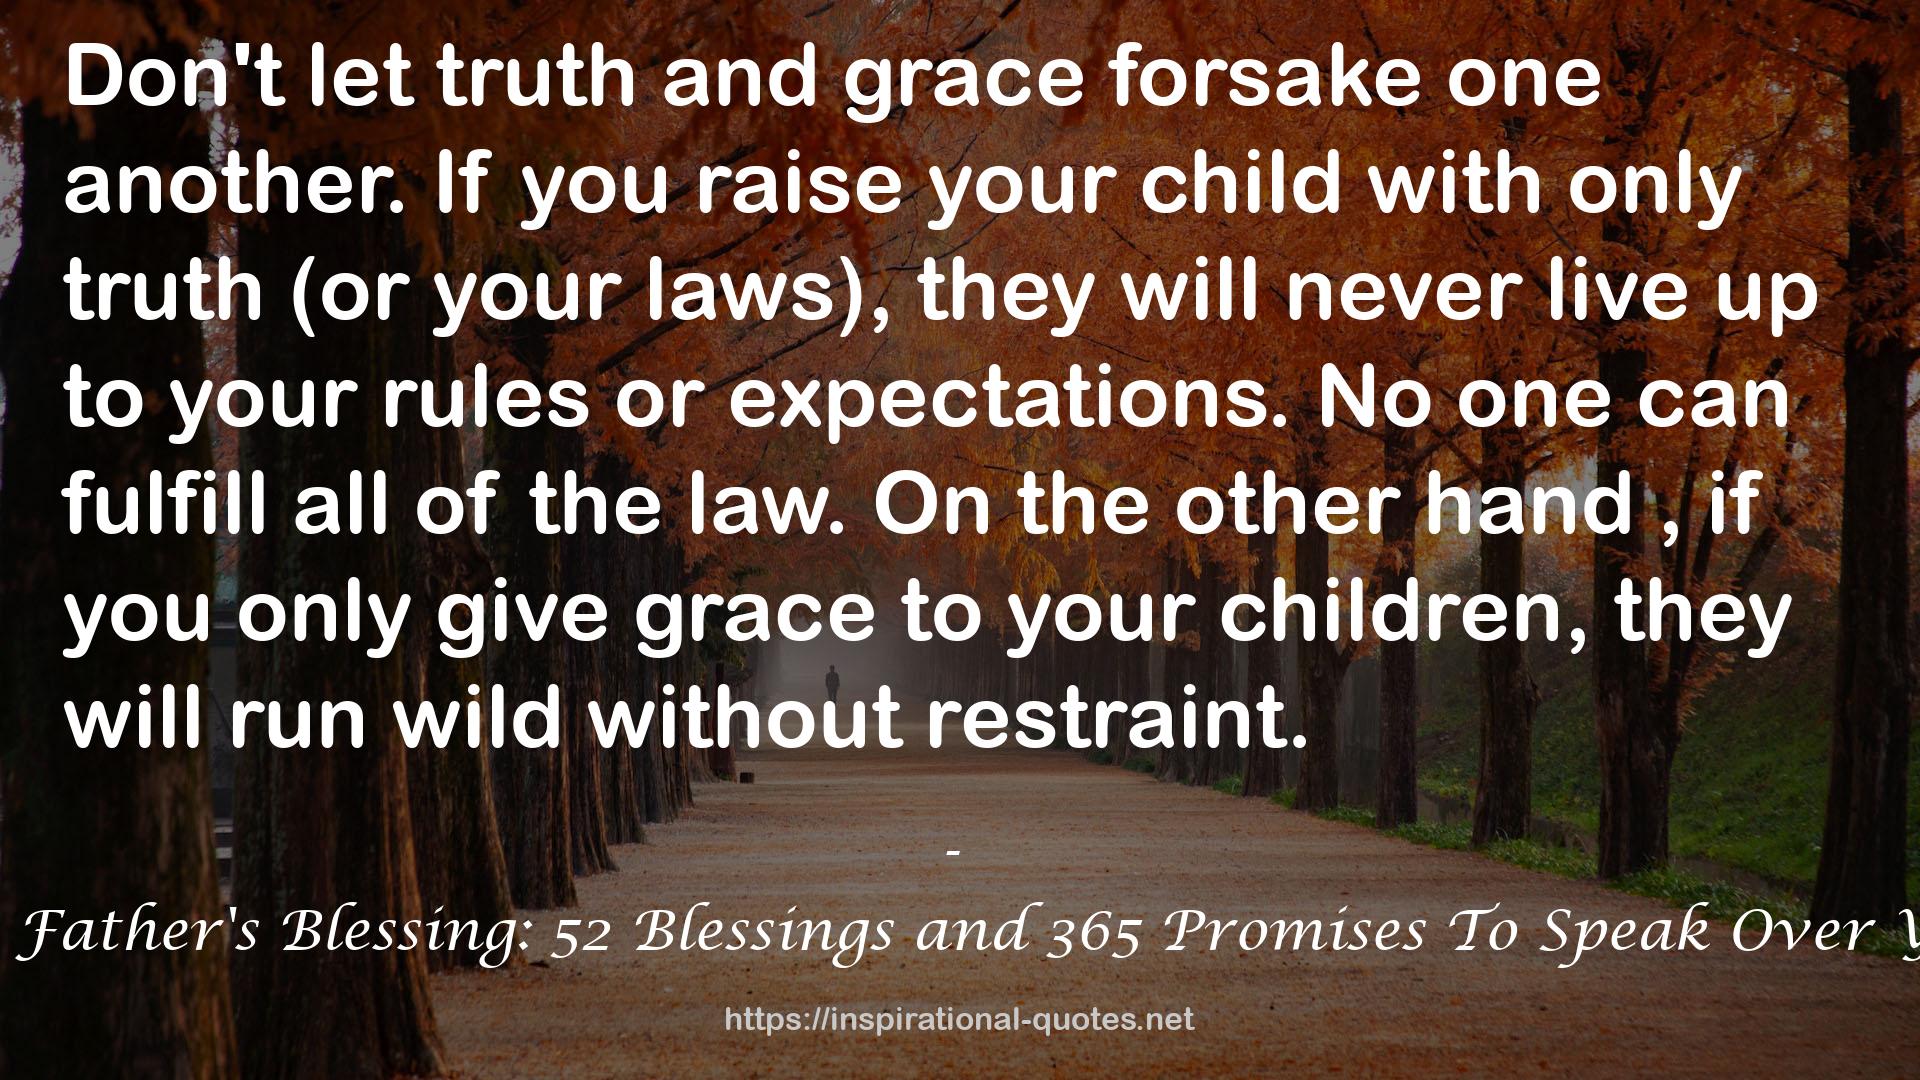 Speaking The Father's Blessing: 52 Blessings and 365 Promises To Speak Over Your Children QUOTES